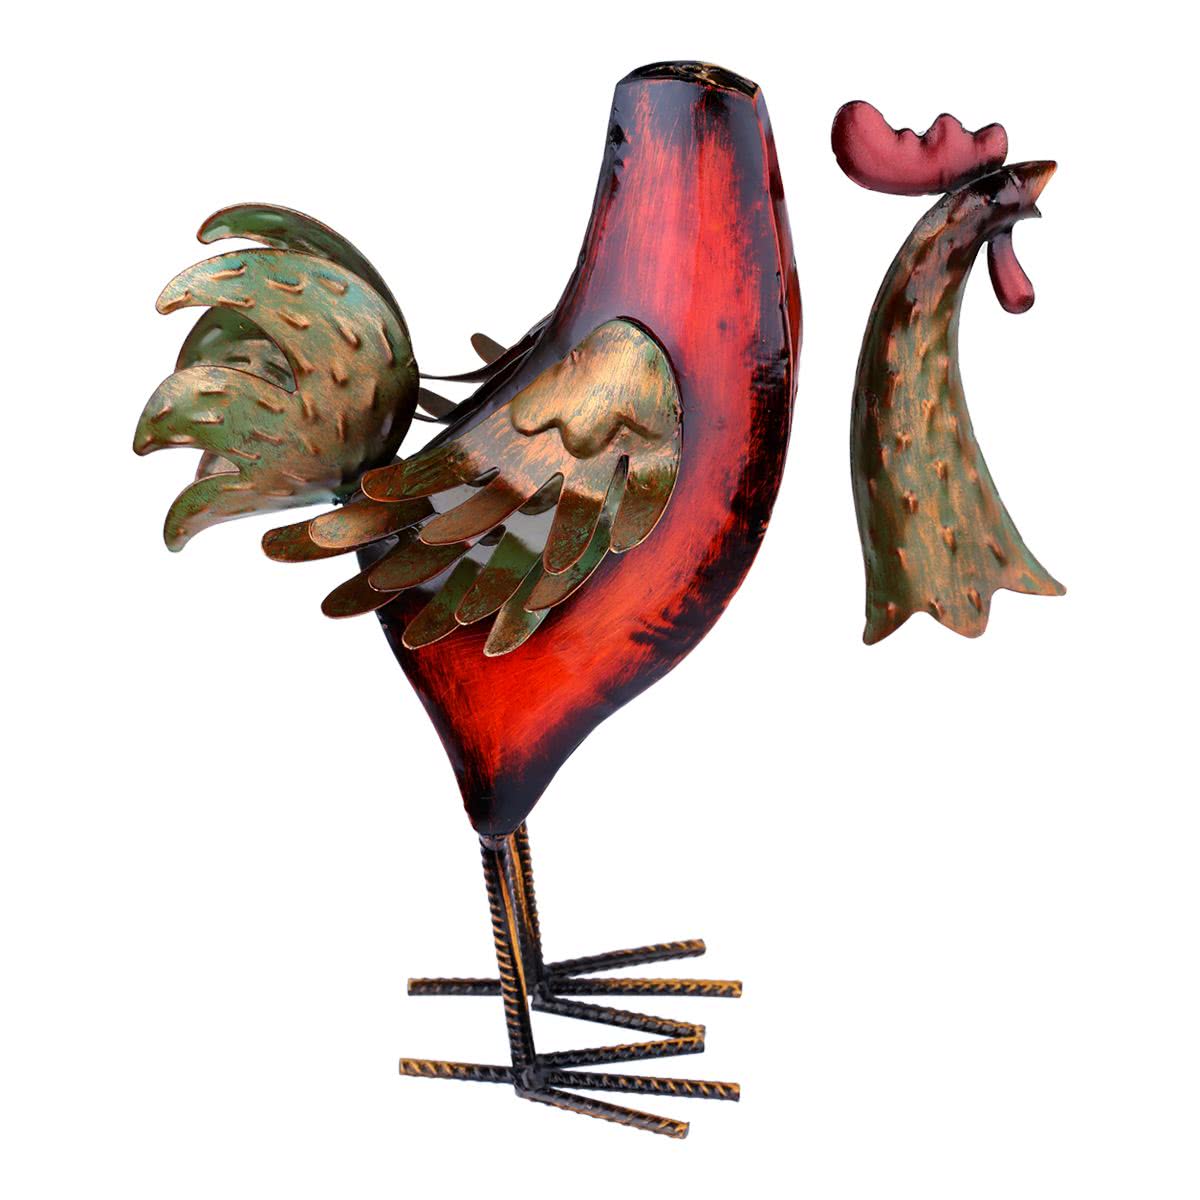 Farmhouse Decor with Metal Rooster for Rooster Kitchen Decor